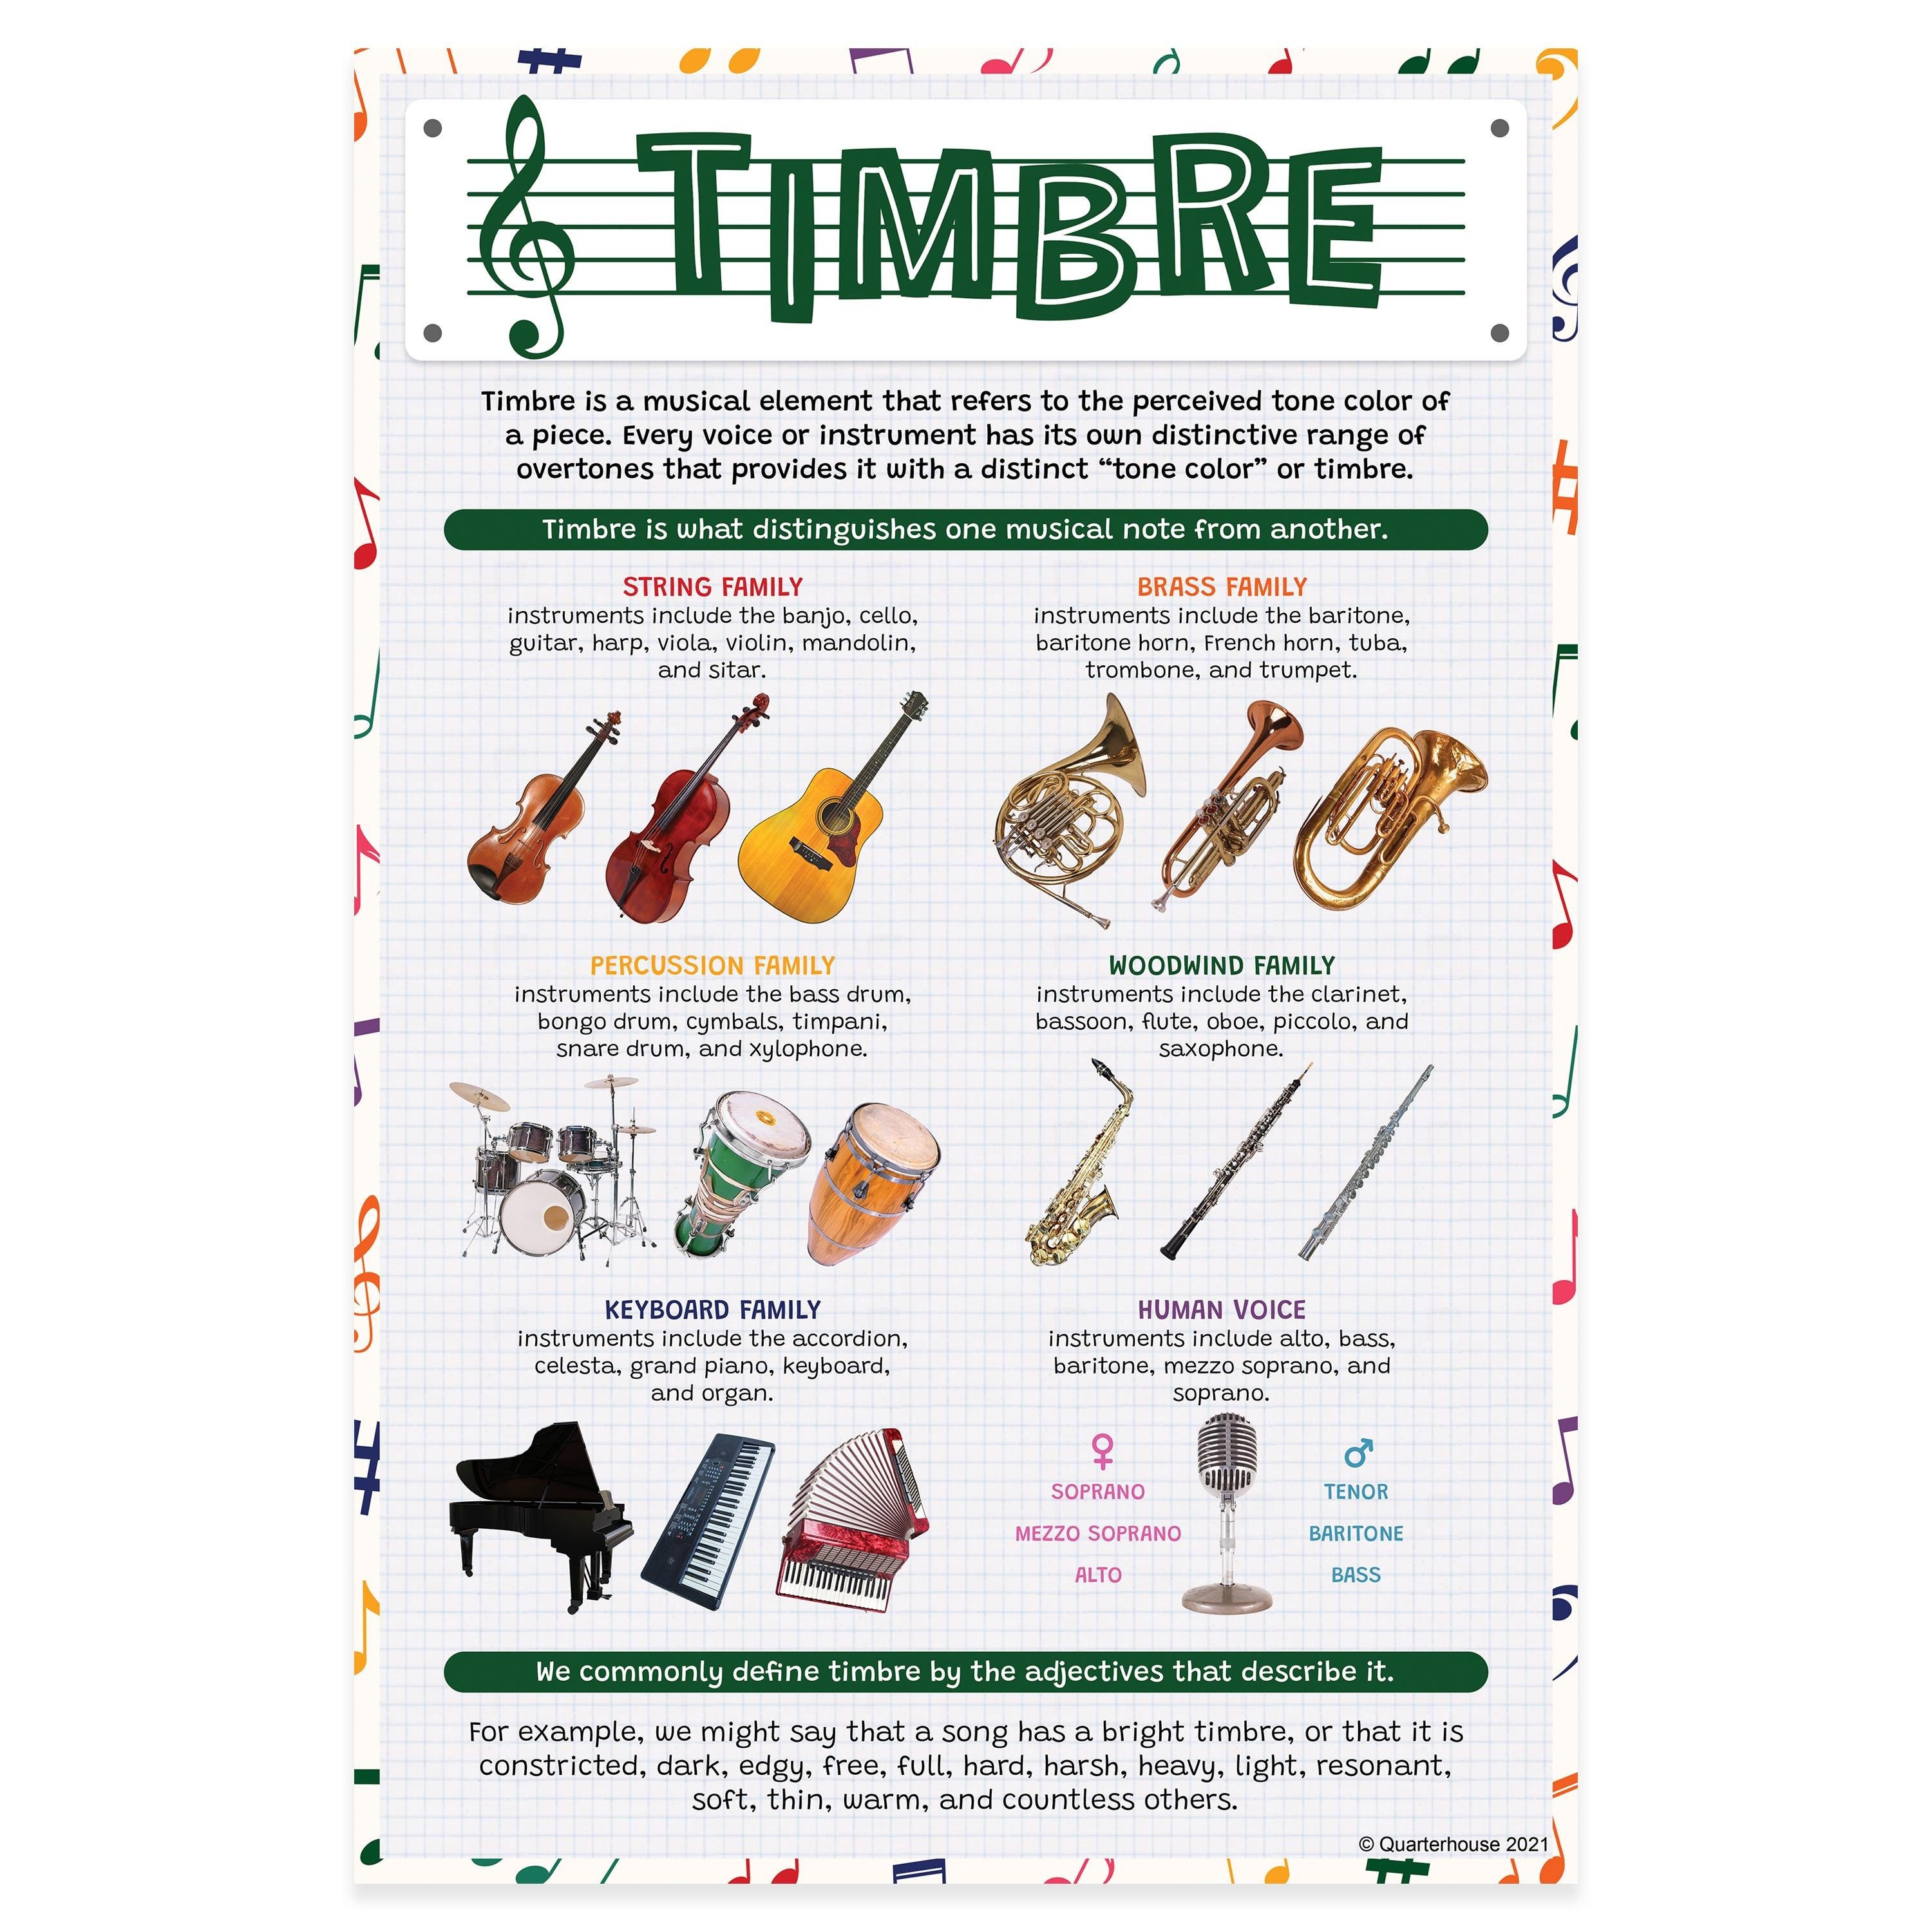 timbre of the instruments